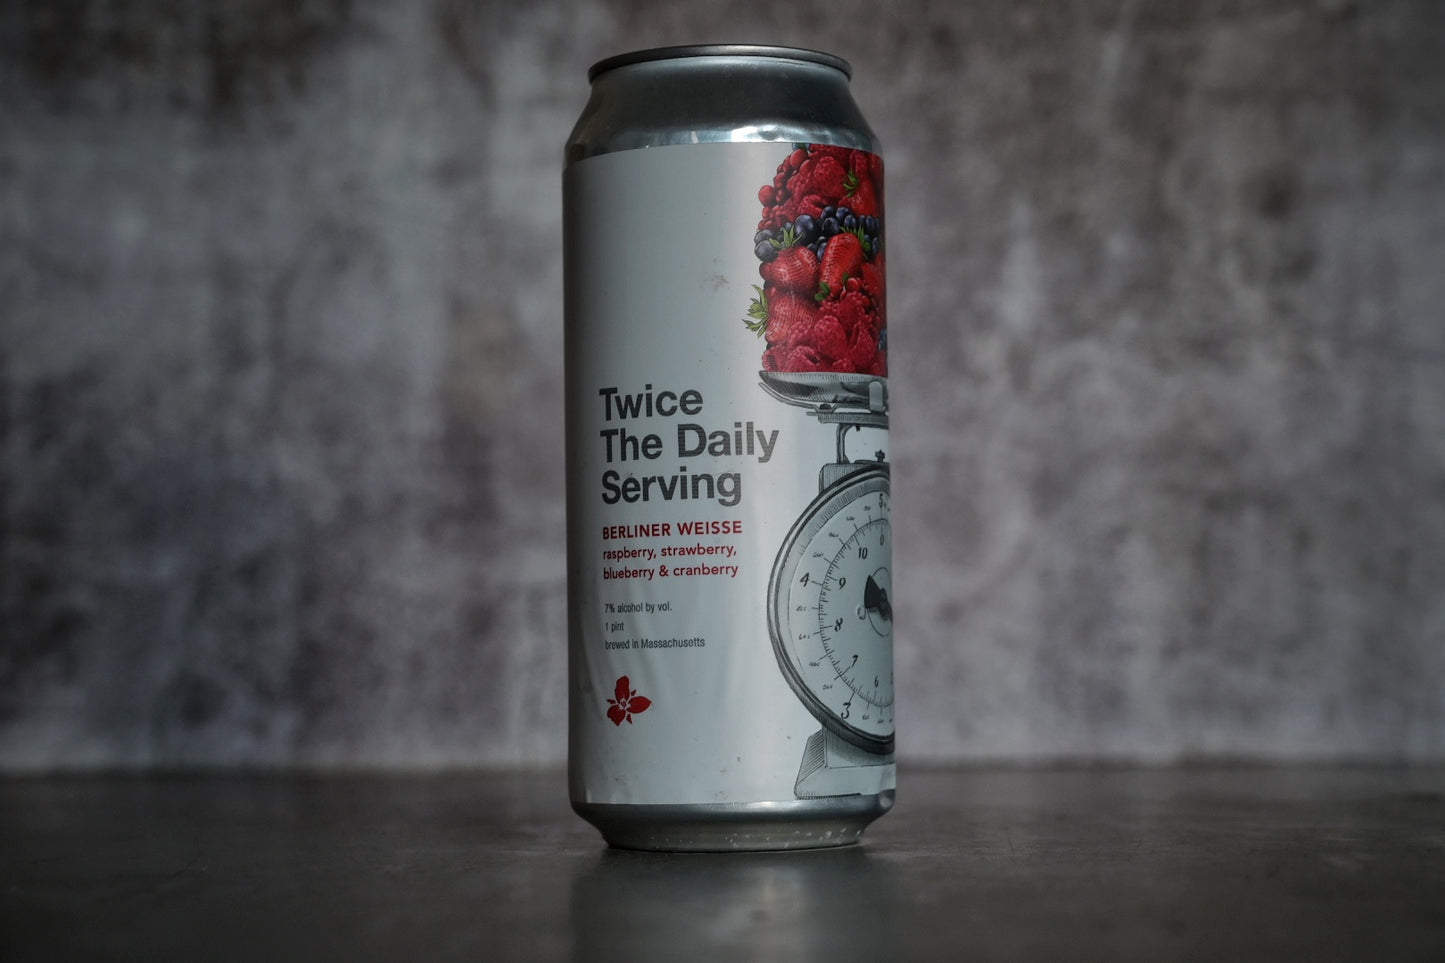 Trillium - Twice the Daily Serving: Raspberry, Strawberry, Blueberry & Cranberry